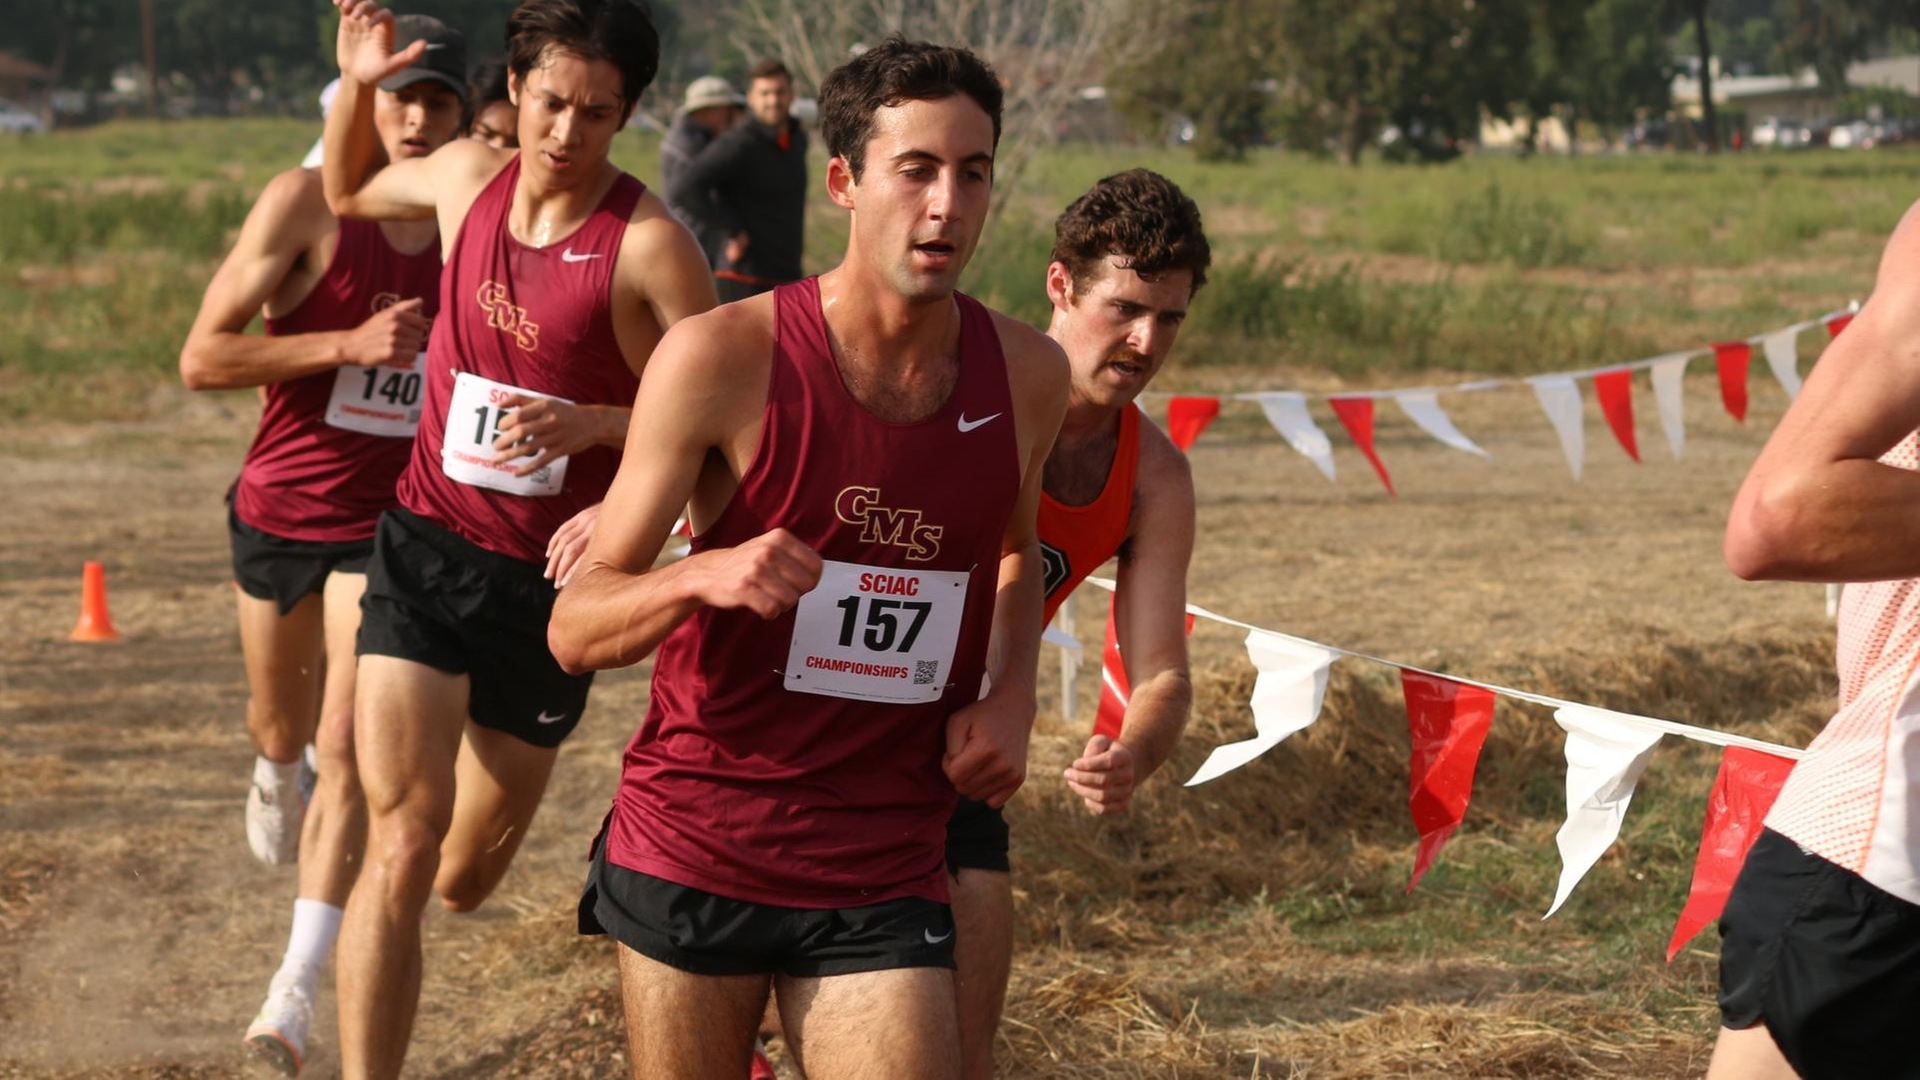 Oliver Pick was 6th to earn first-team All-SCIAC honors (photo by Christian Campbell)